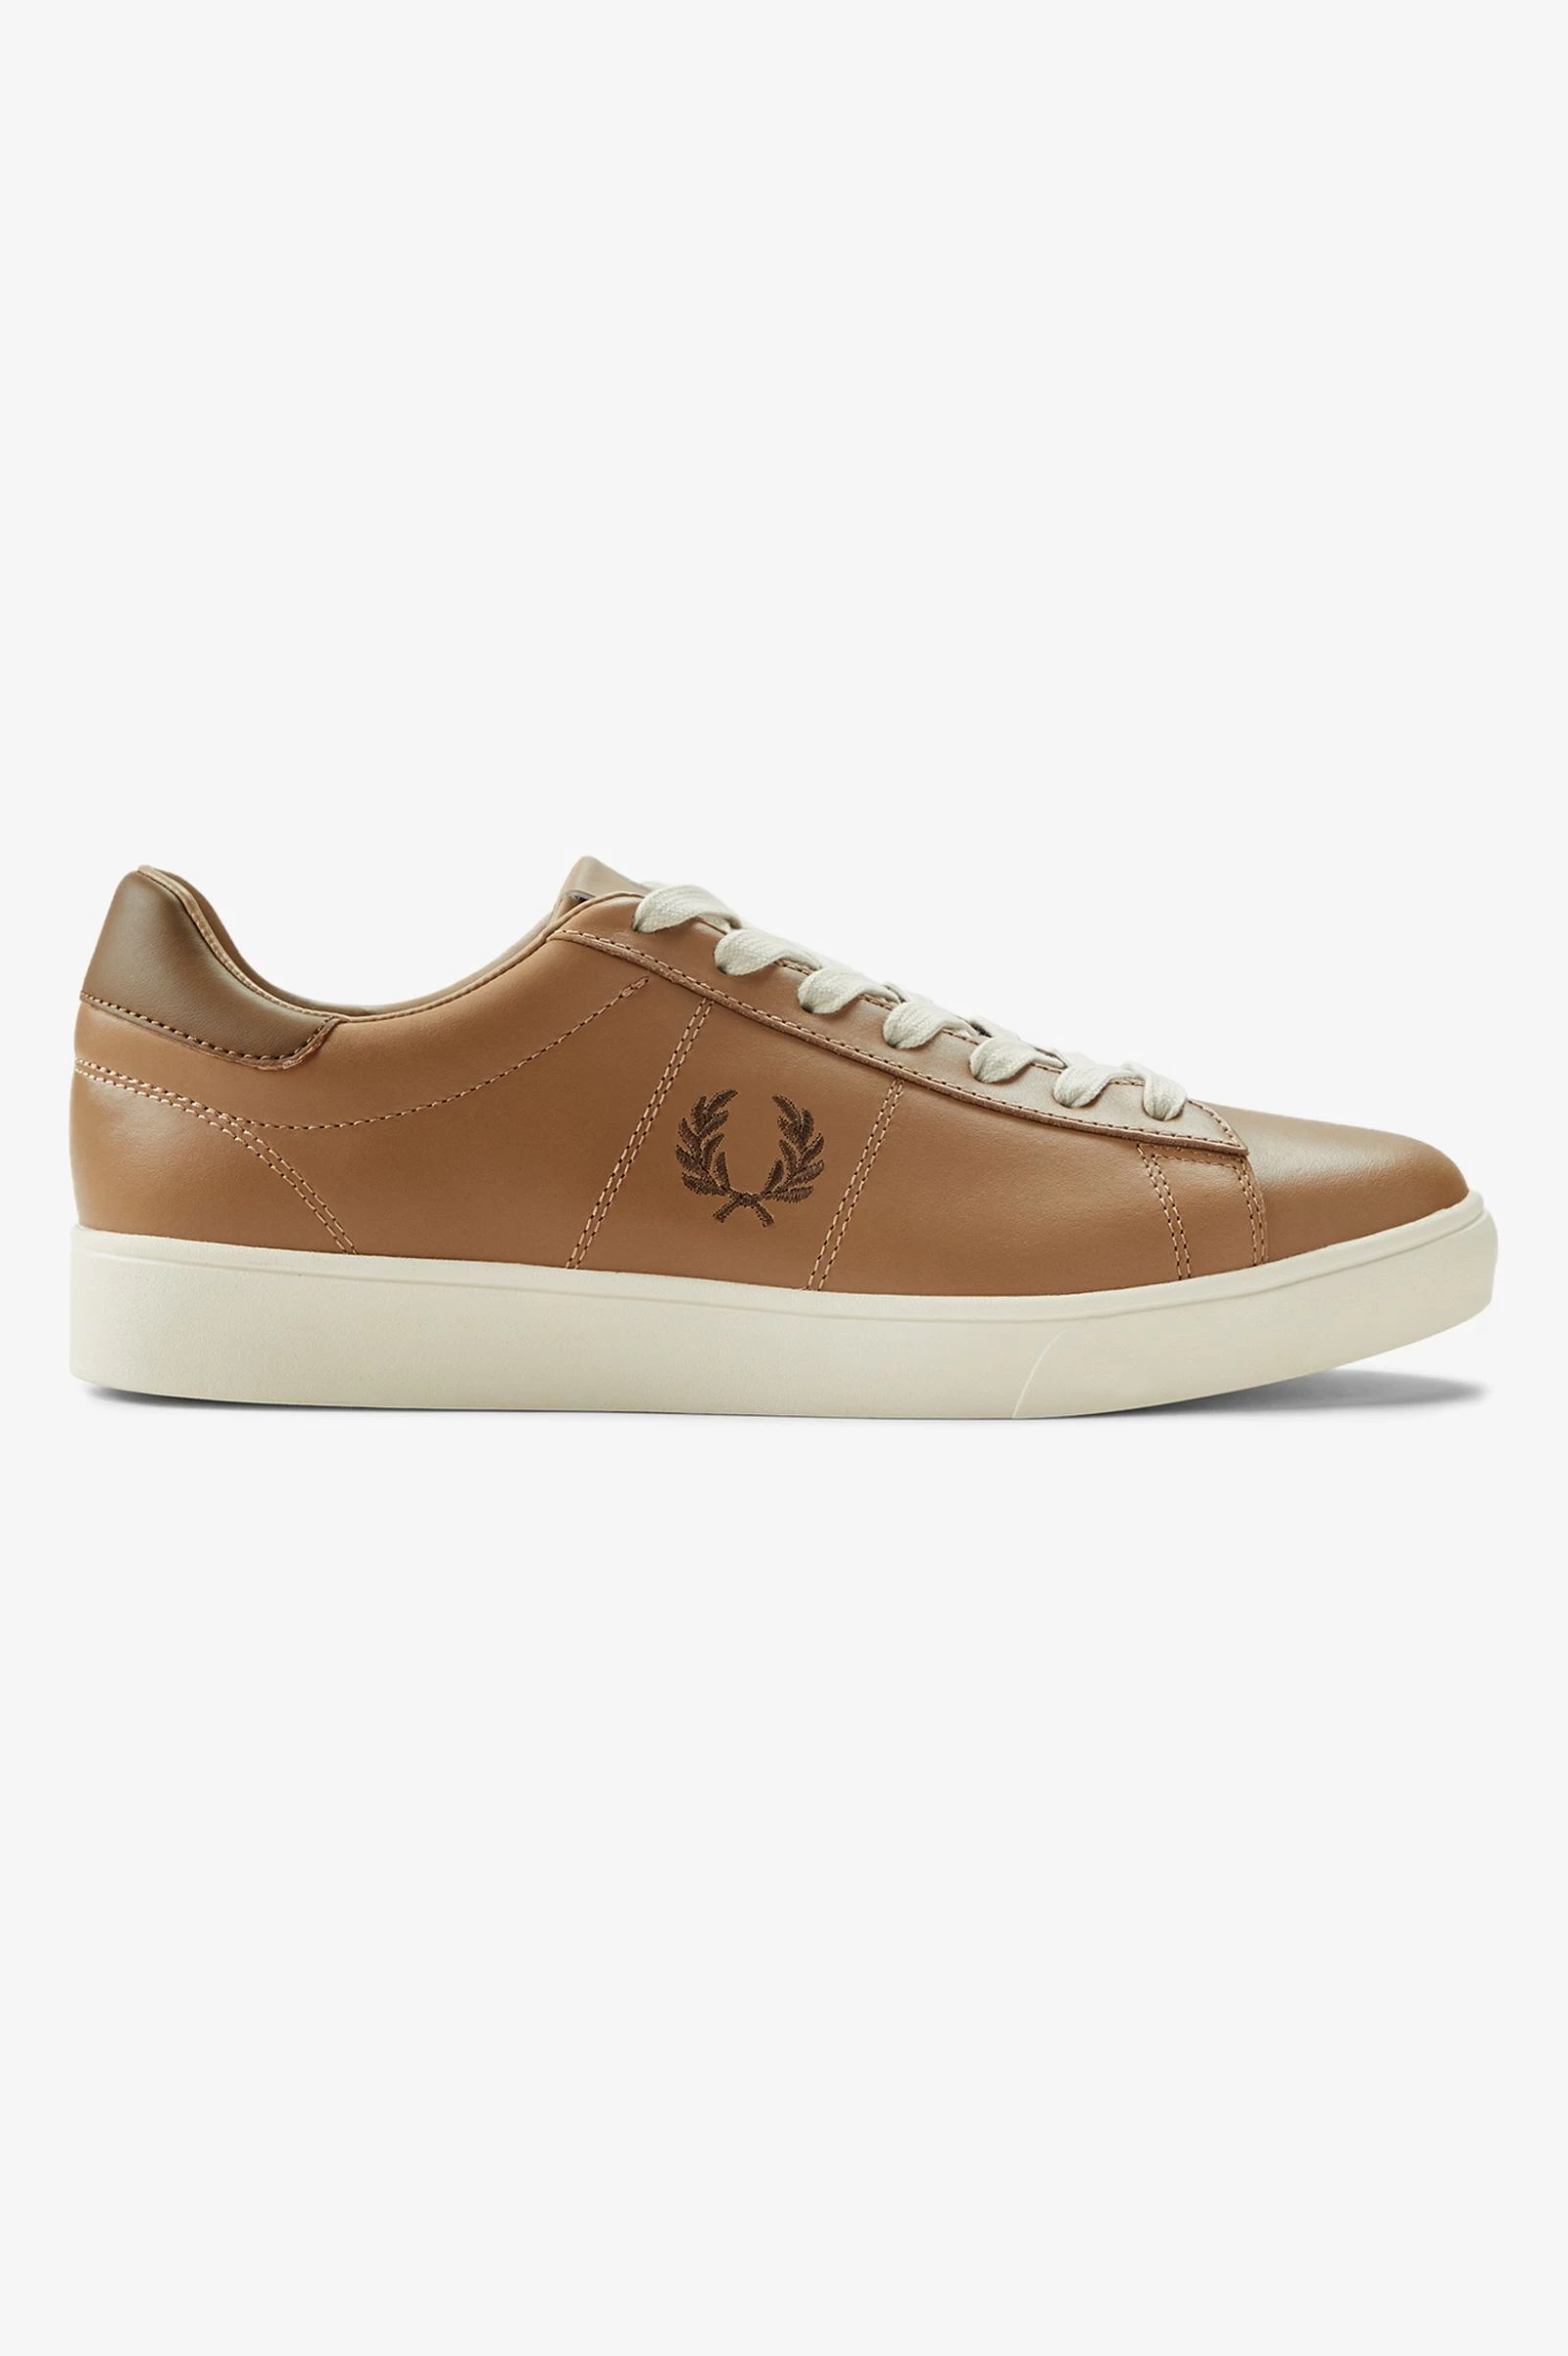 Fred Perry Ανδρικό Δερμάτινο Sneaker Spencer Leather B4334-V58 Καφέ